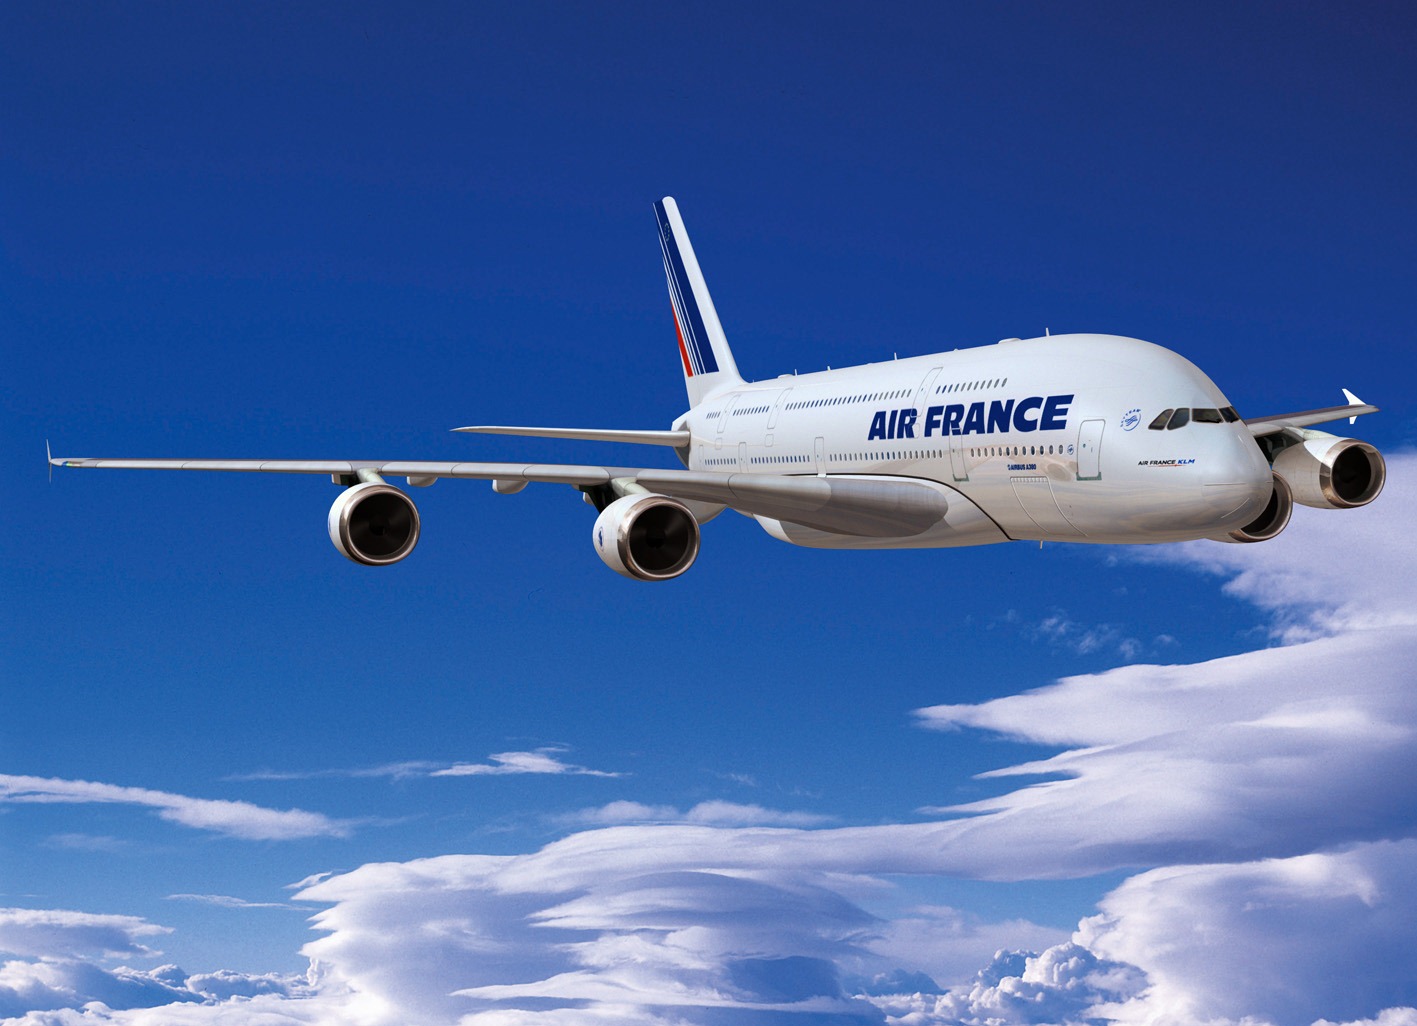 Download this Air France Flights picture